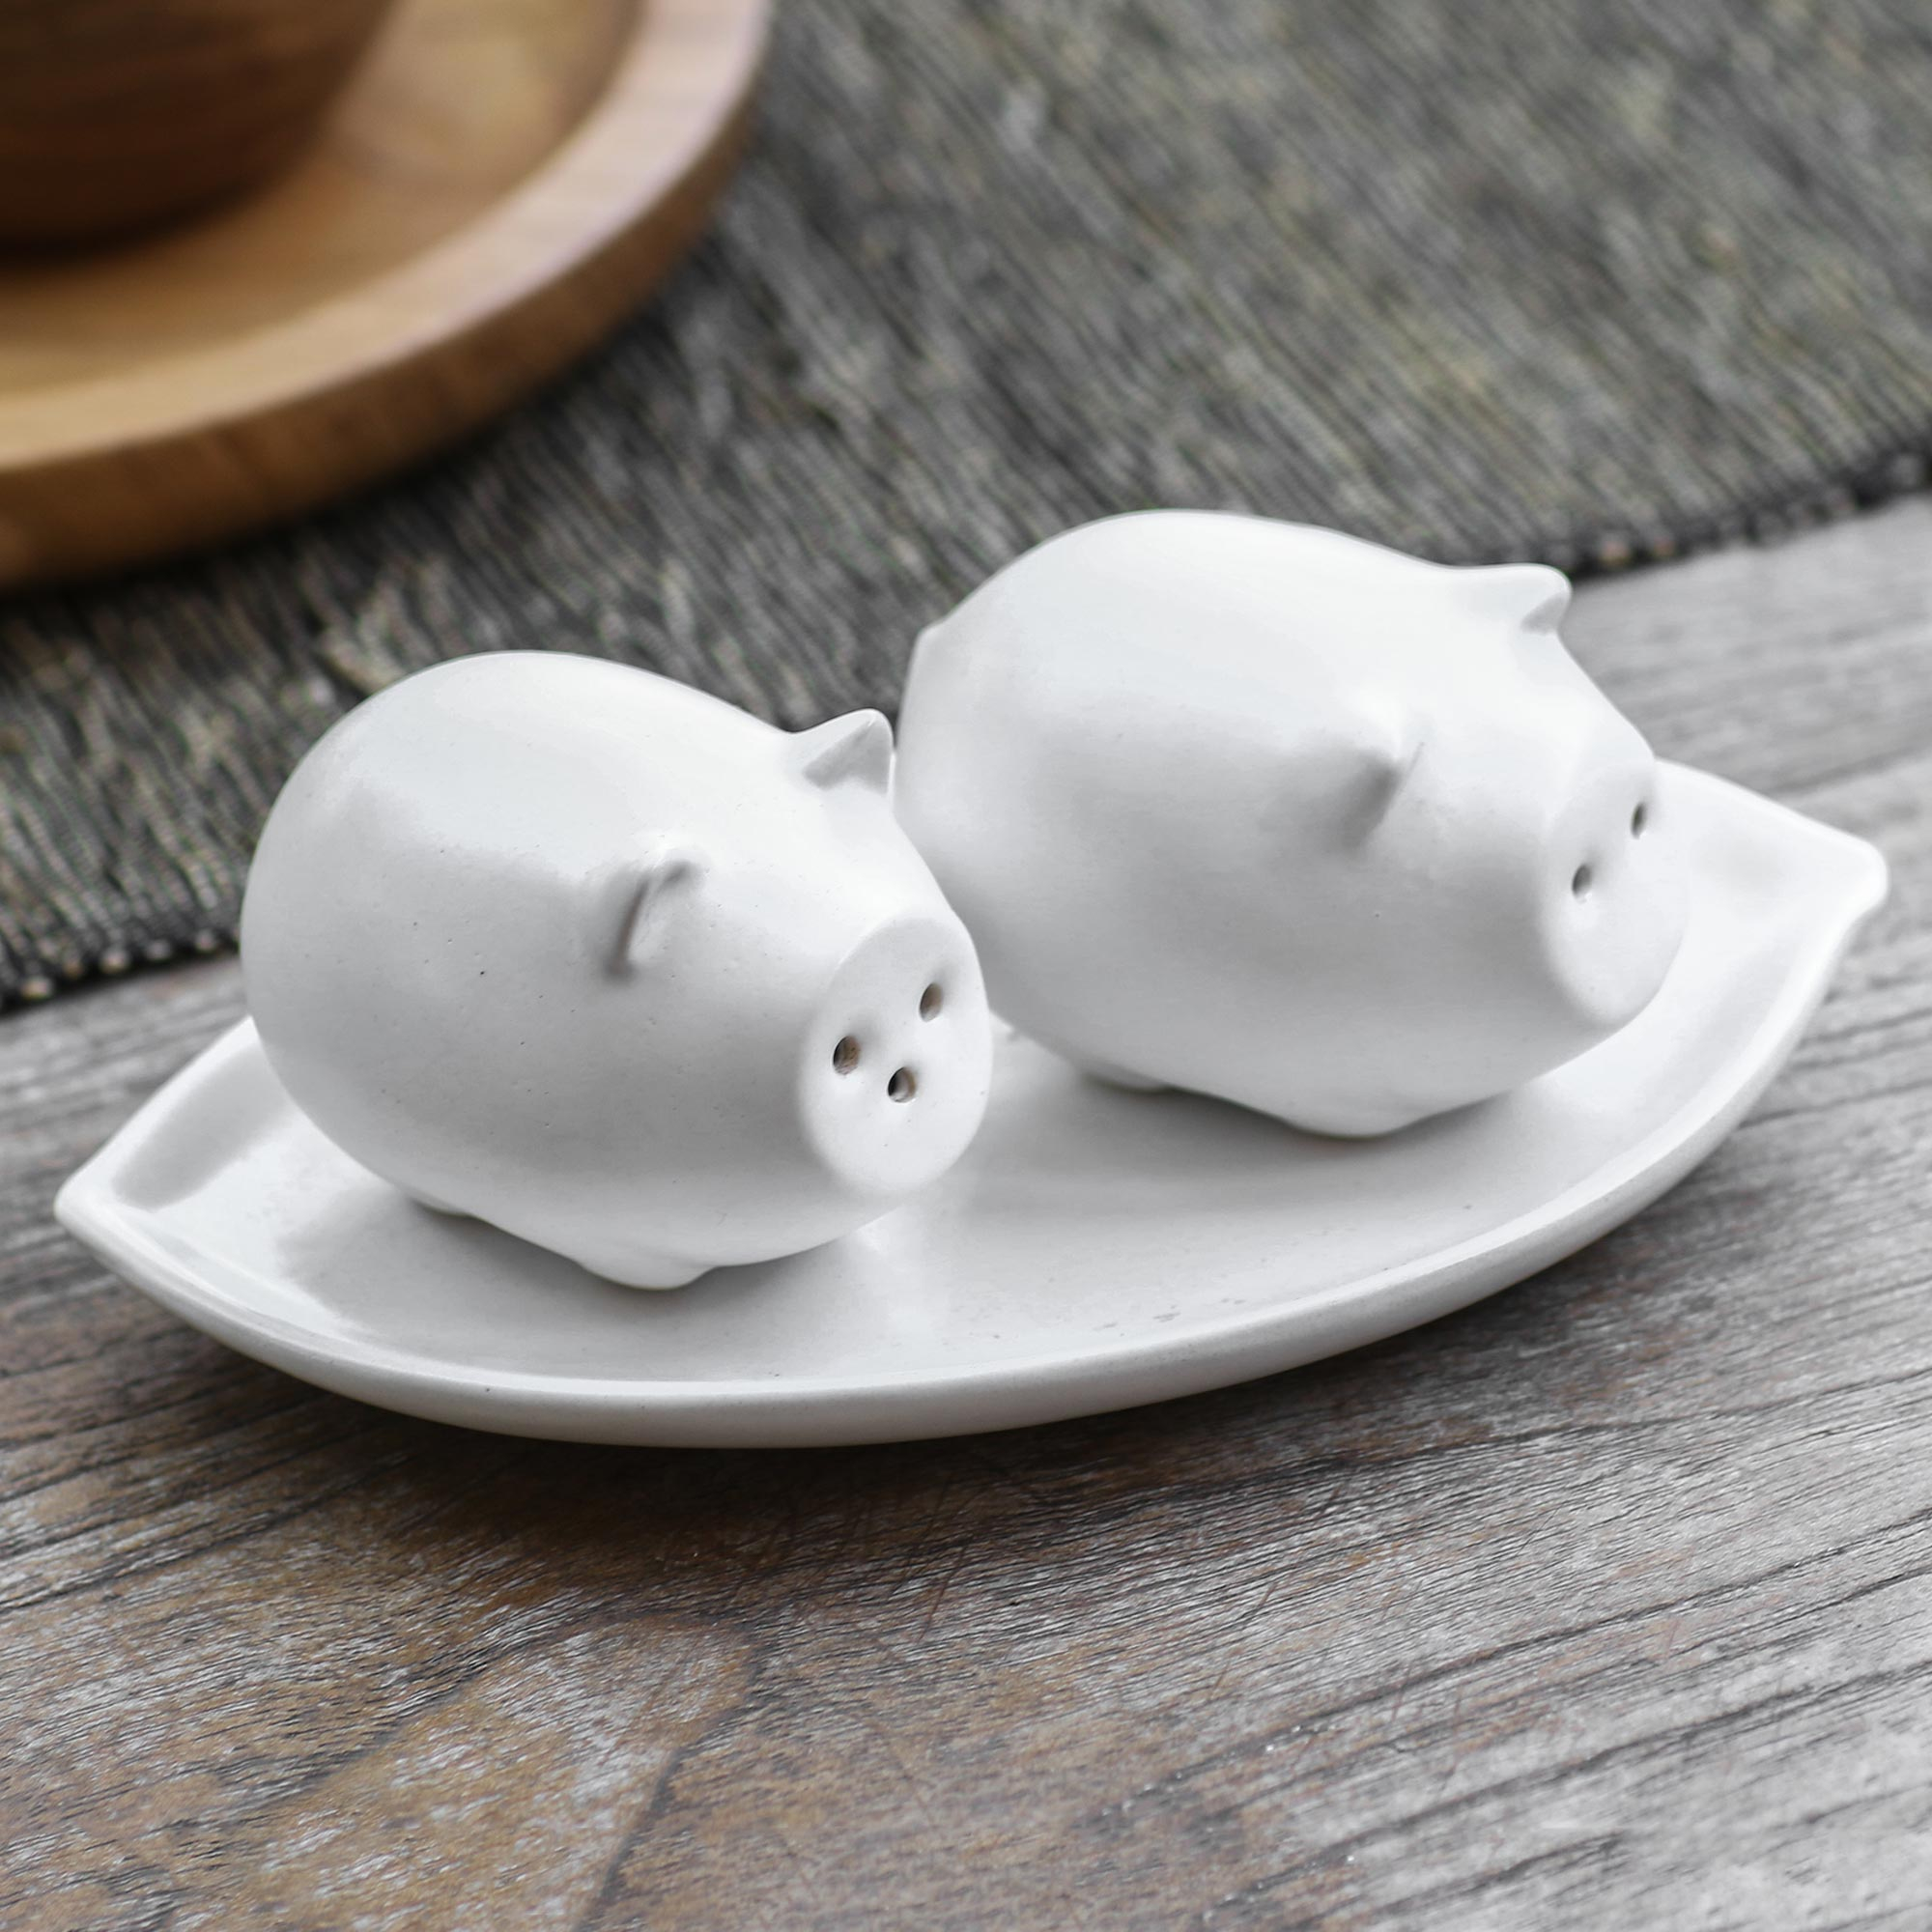 Decorative Table Accessories and Farm Animals Kitchen Decor 6.5 H Pig Salt and Pepper Shakers Set with Holder Cute Salt and Pepper Shaker Farmhouse Pig Gifts for Pig Lovers 